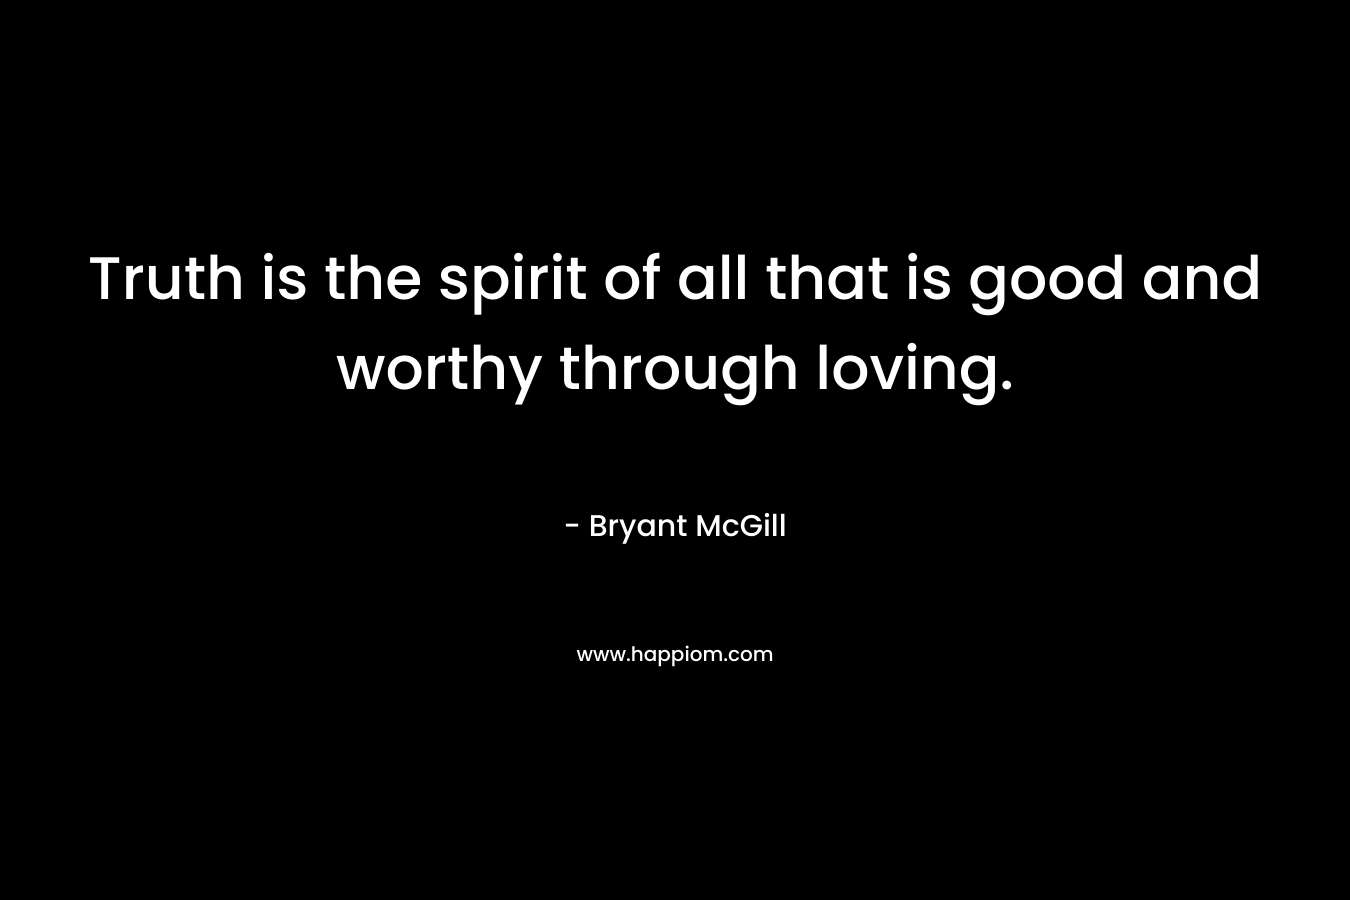 Truth is the spirit of all that is good and worthy through loving. – Bryant McGill